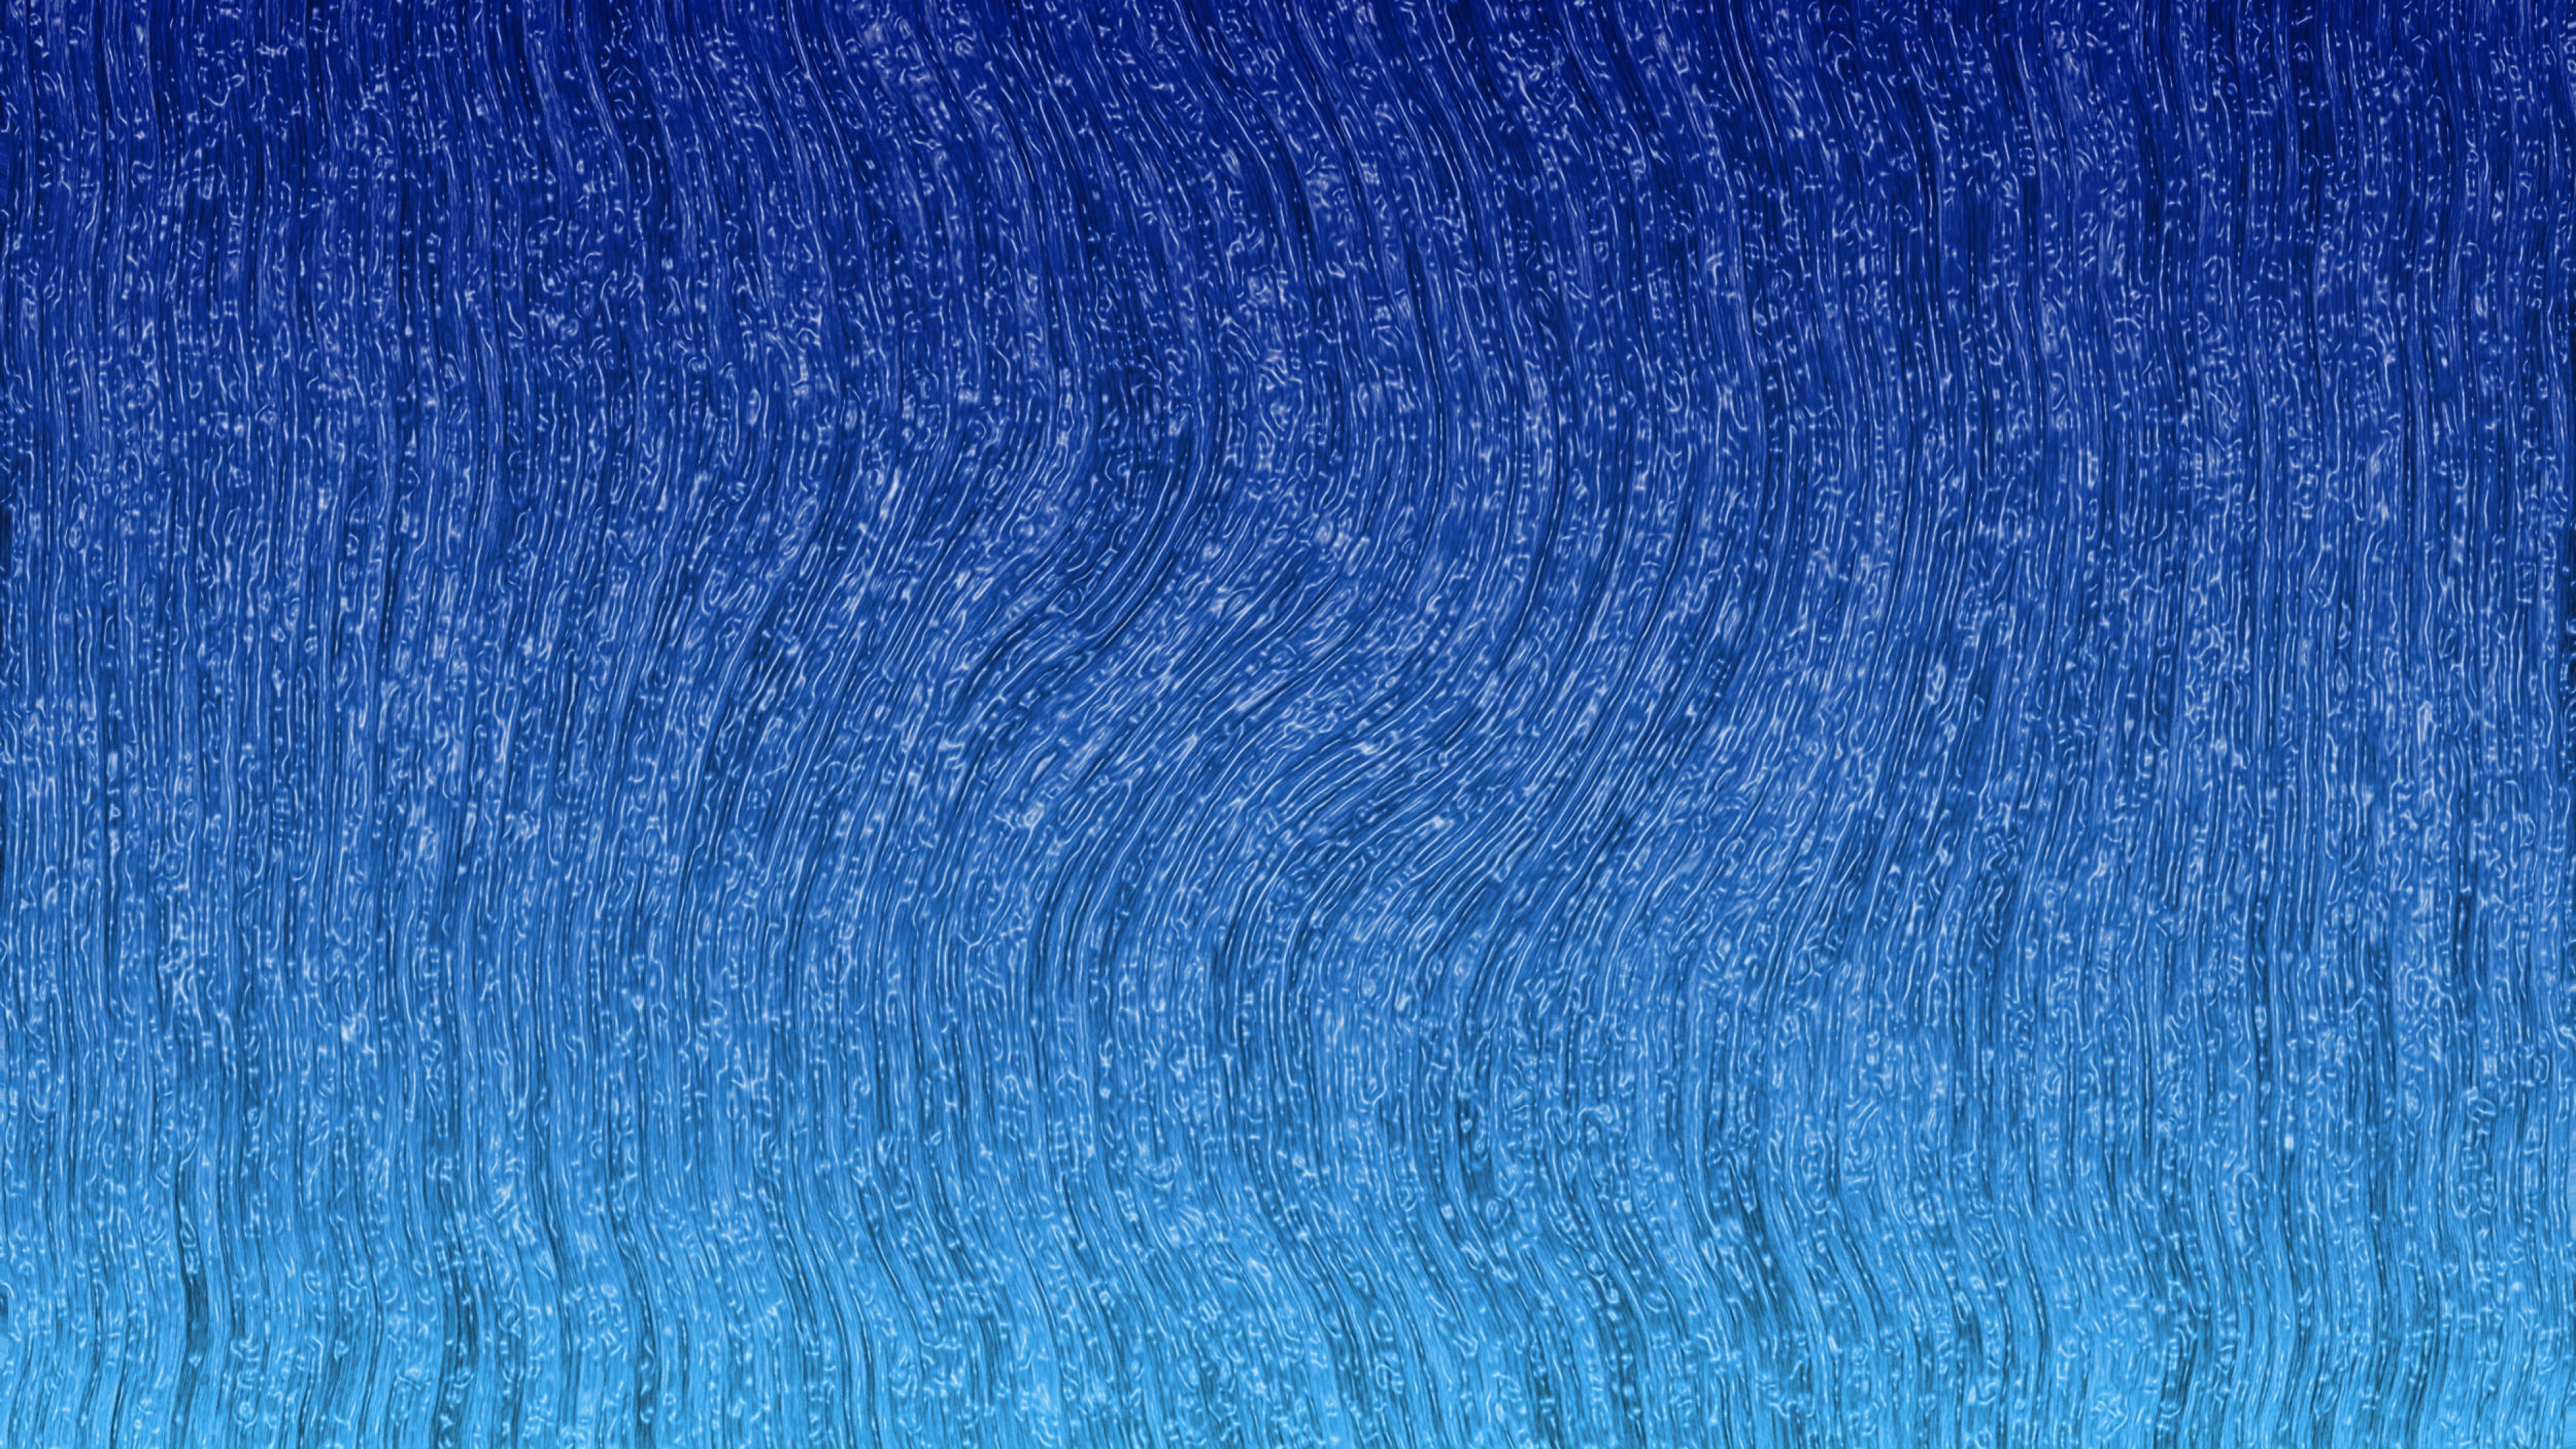 Wavy Tumblr Abstract Background 8241 3840 x 2160 - WallpaperLayer.com